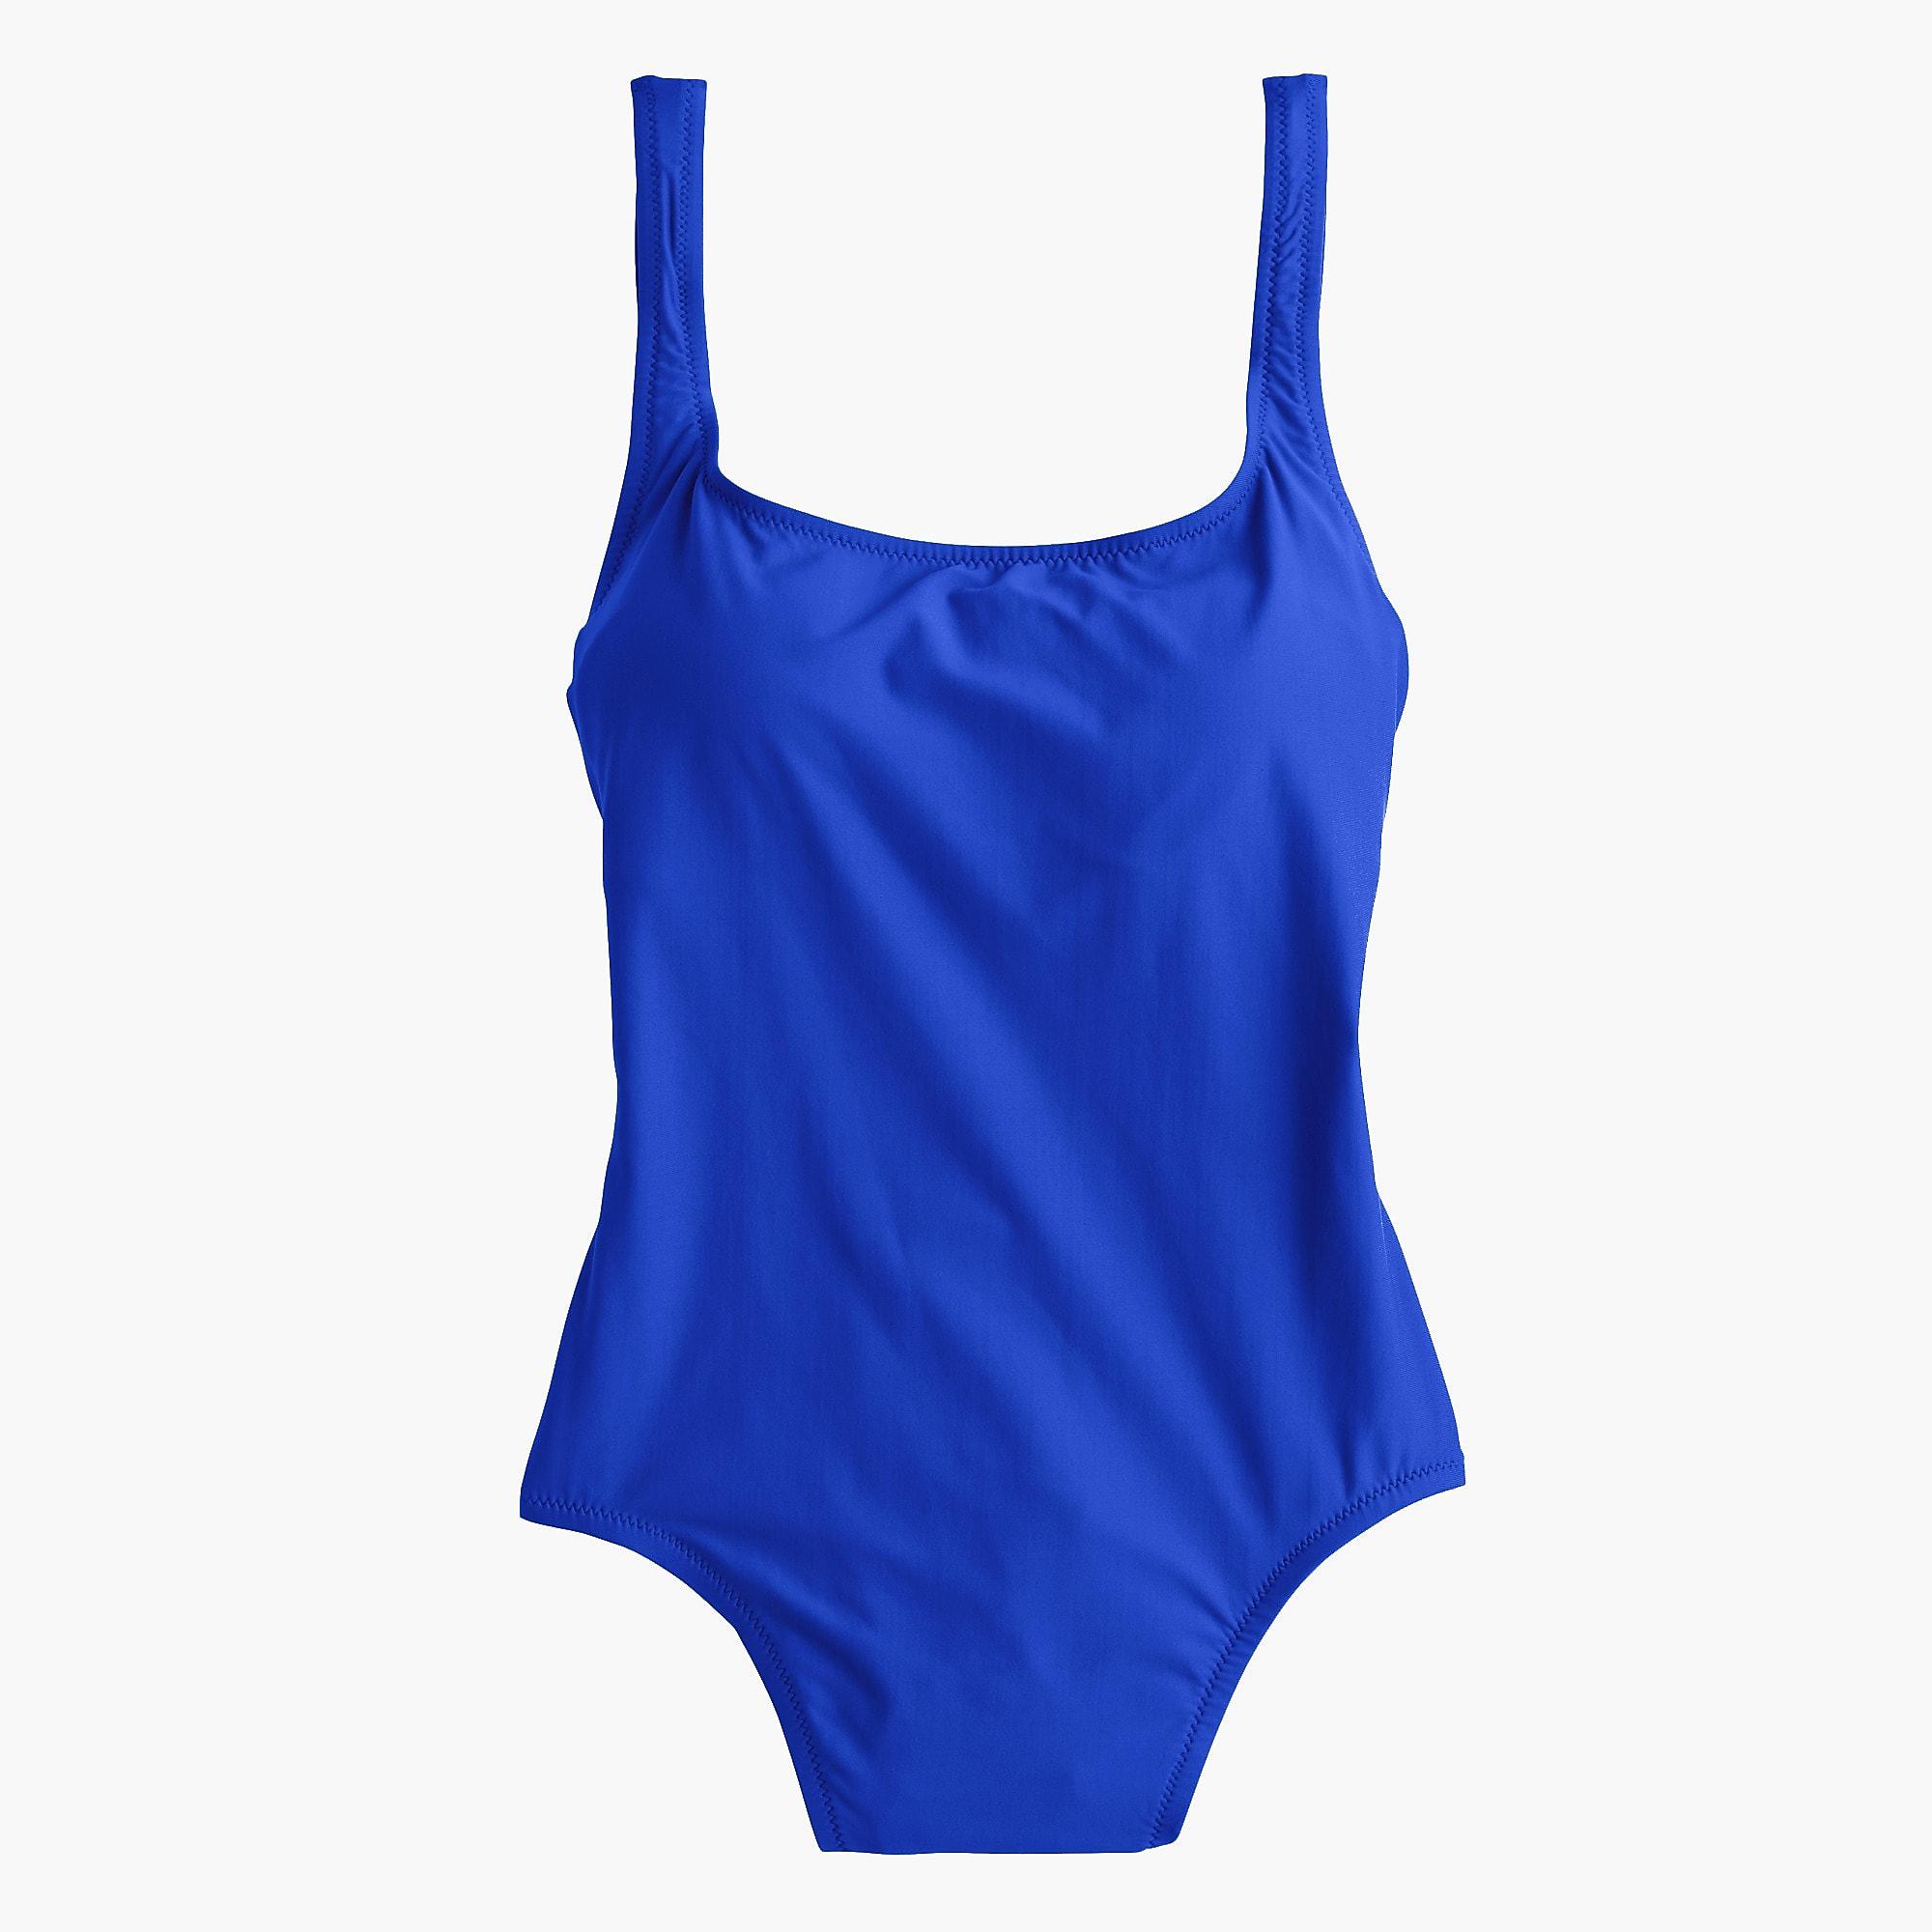 J Crew Synthetic Women S 1989 Scoopback One Piece Swimsuit In Blue Lyst